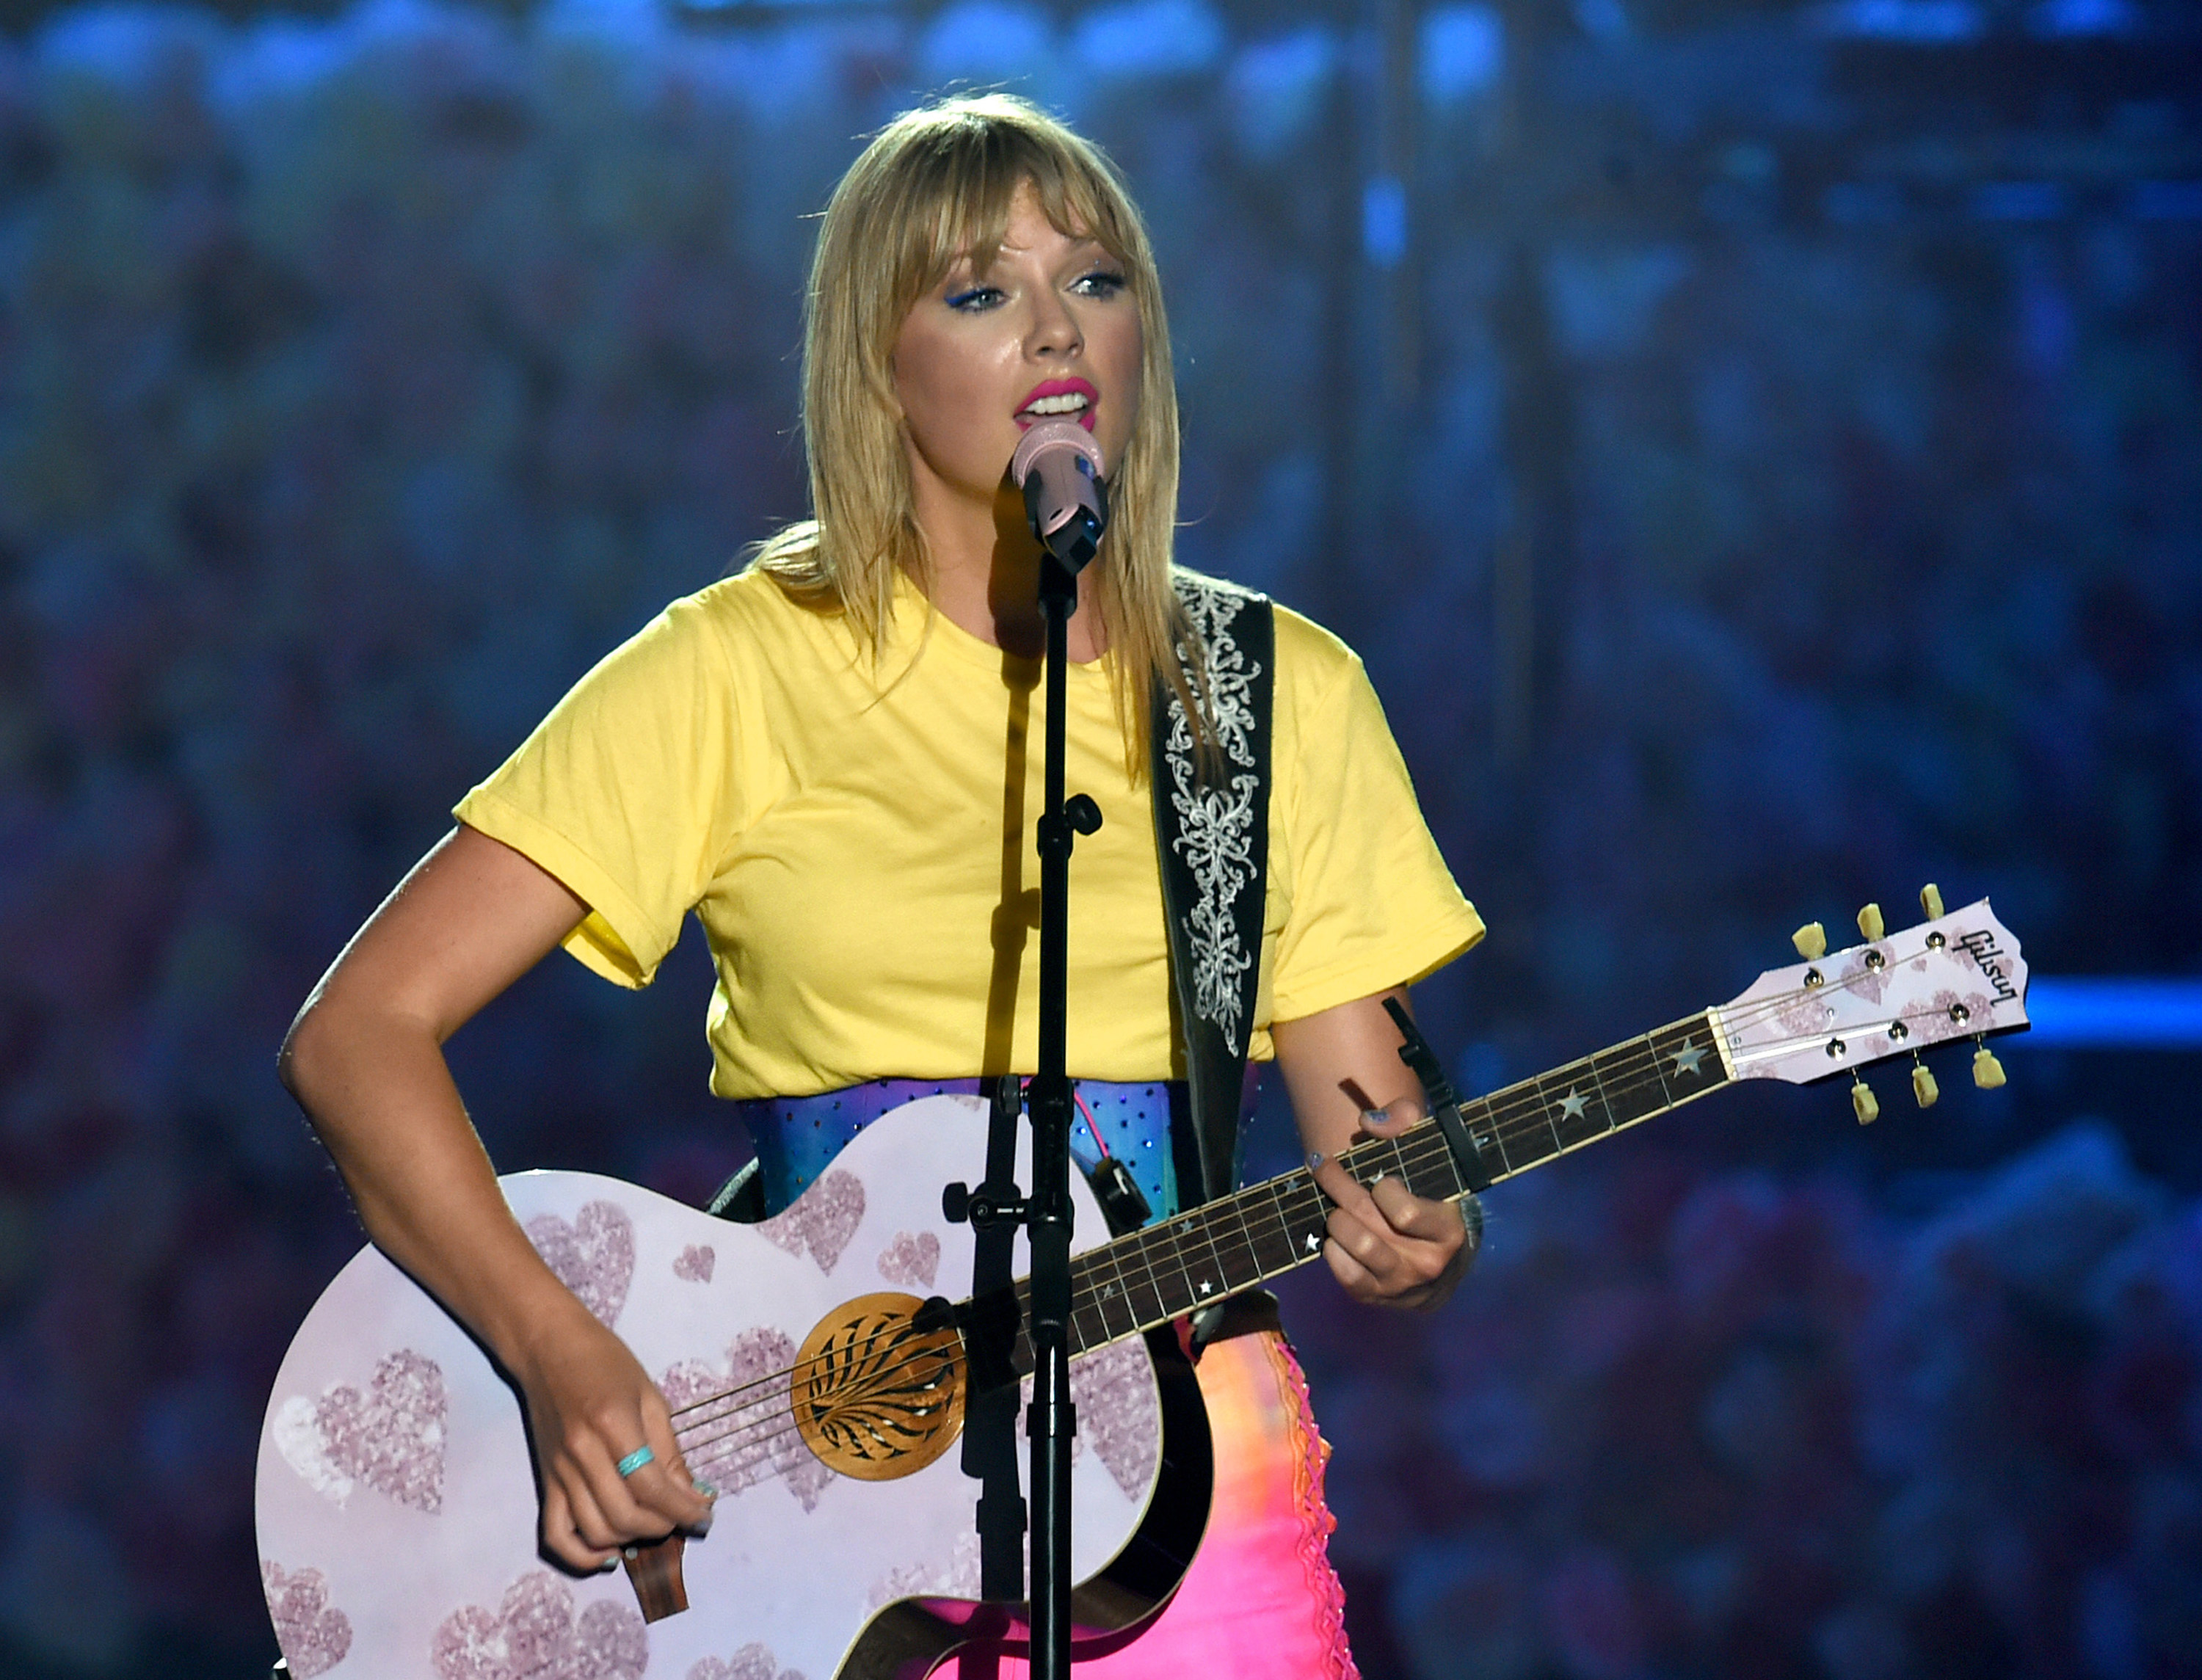 Close-up of Taylor playing a guitar and singing onstage